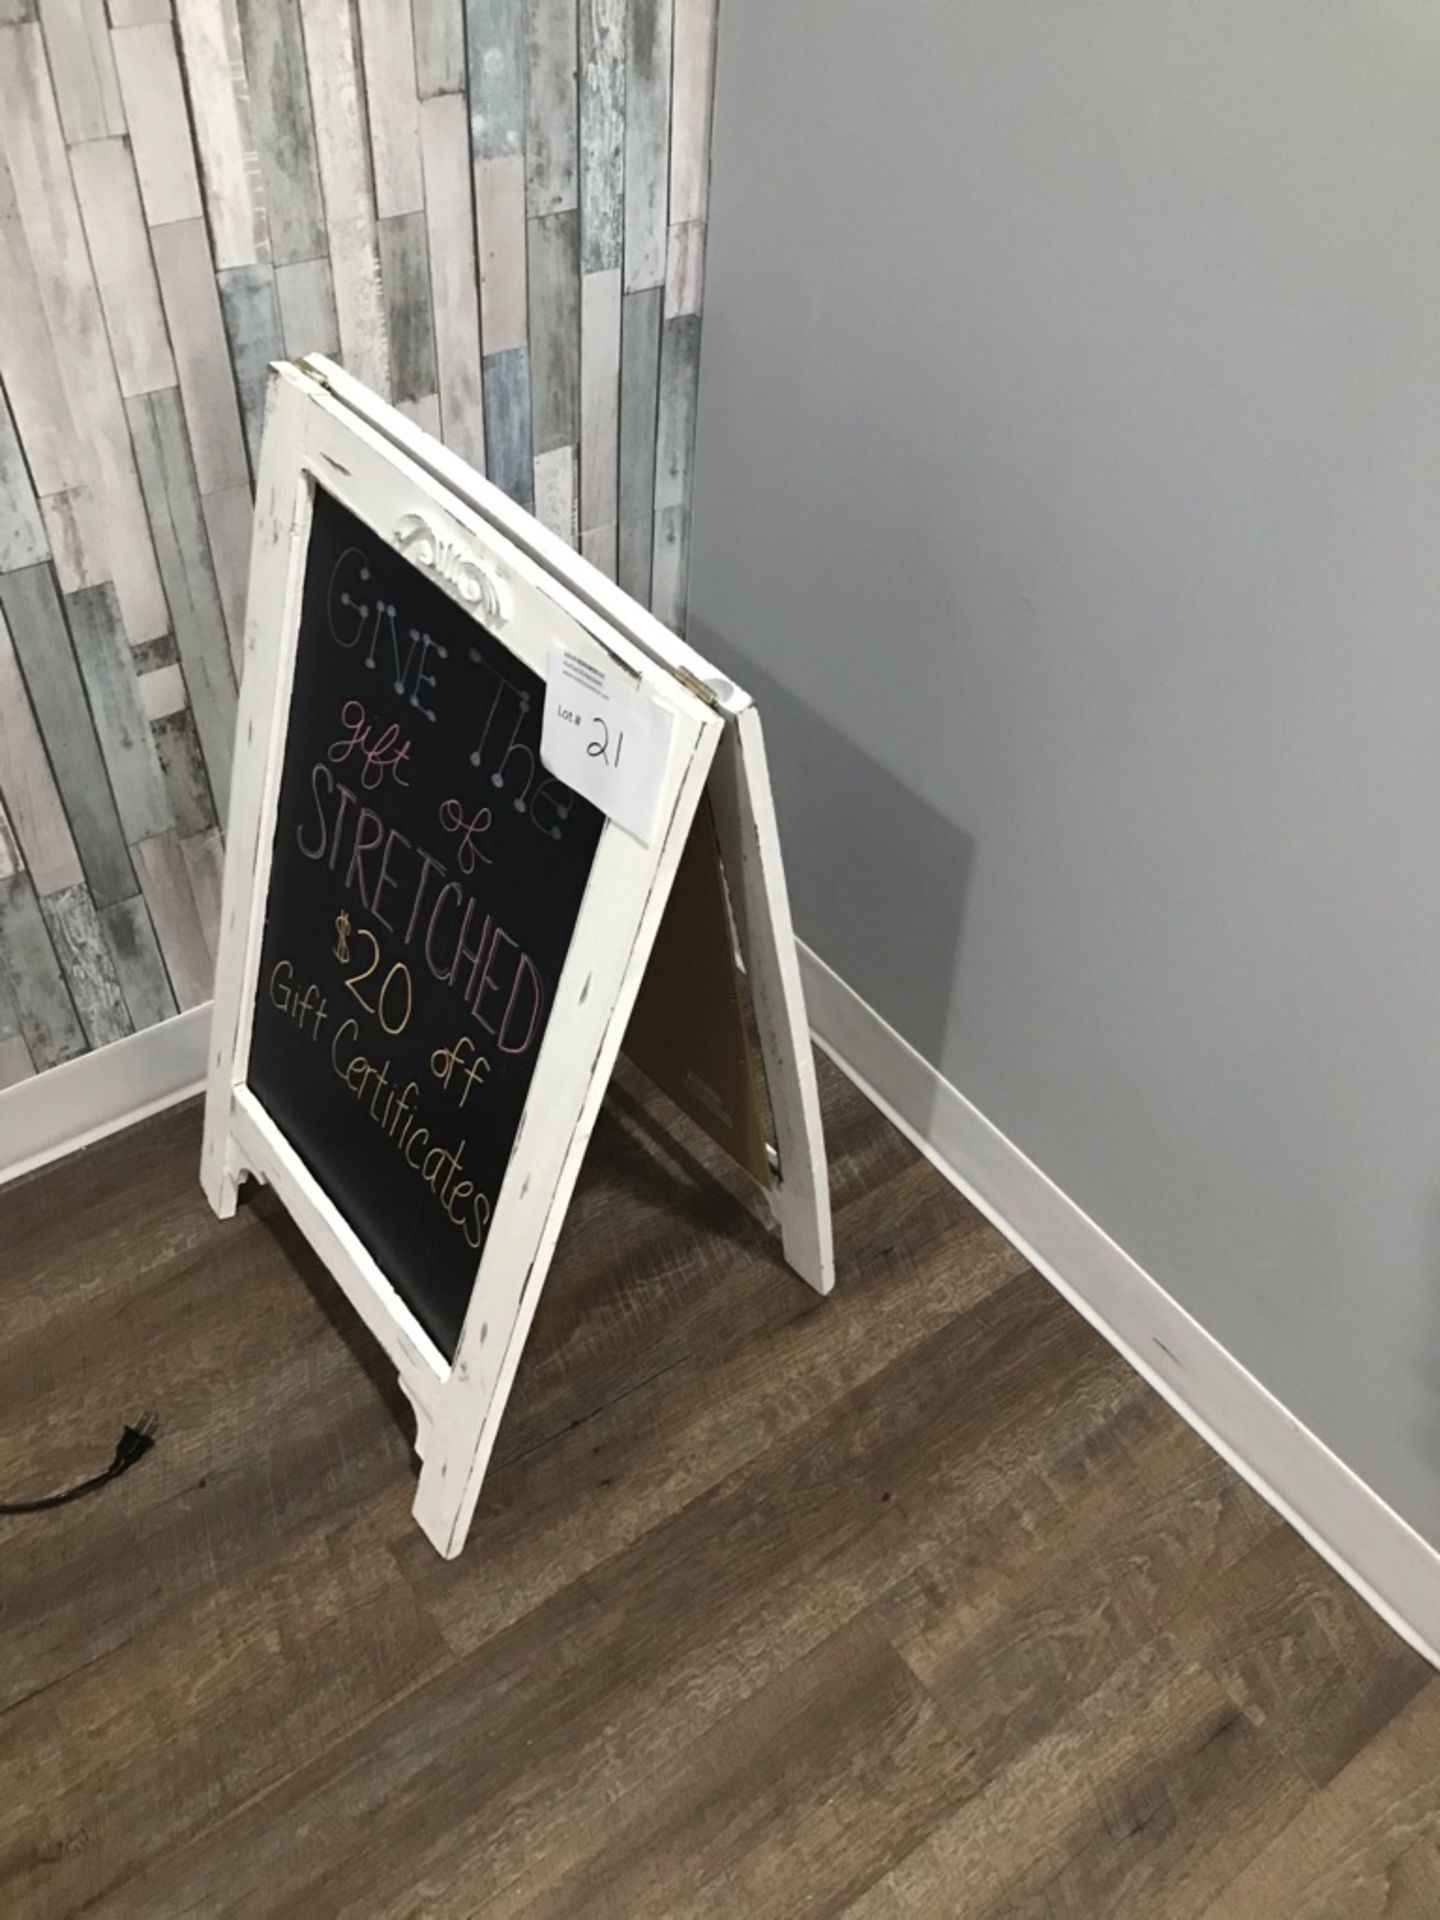 A-FRAME ADVERTISING BOARD, CHALKBOARD SURFACE, APPROX 24" HIGH